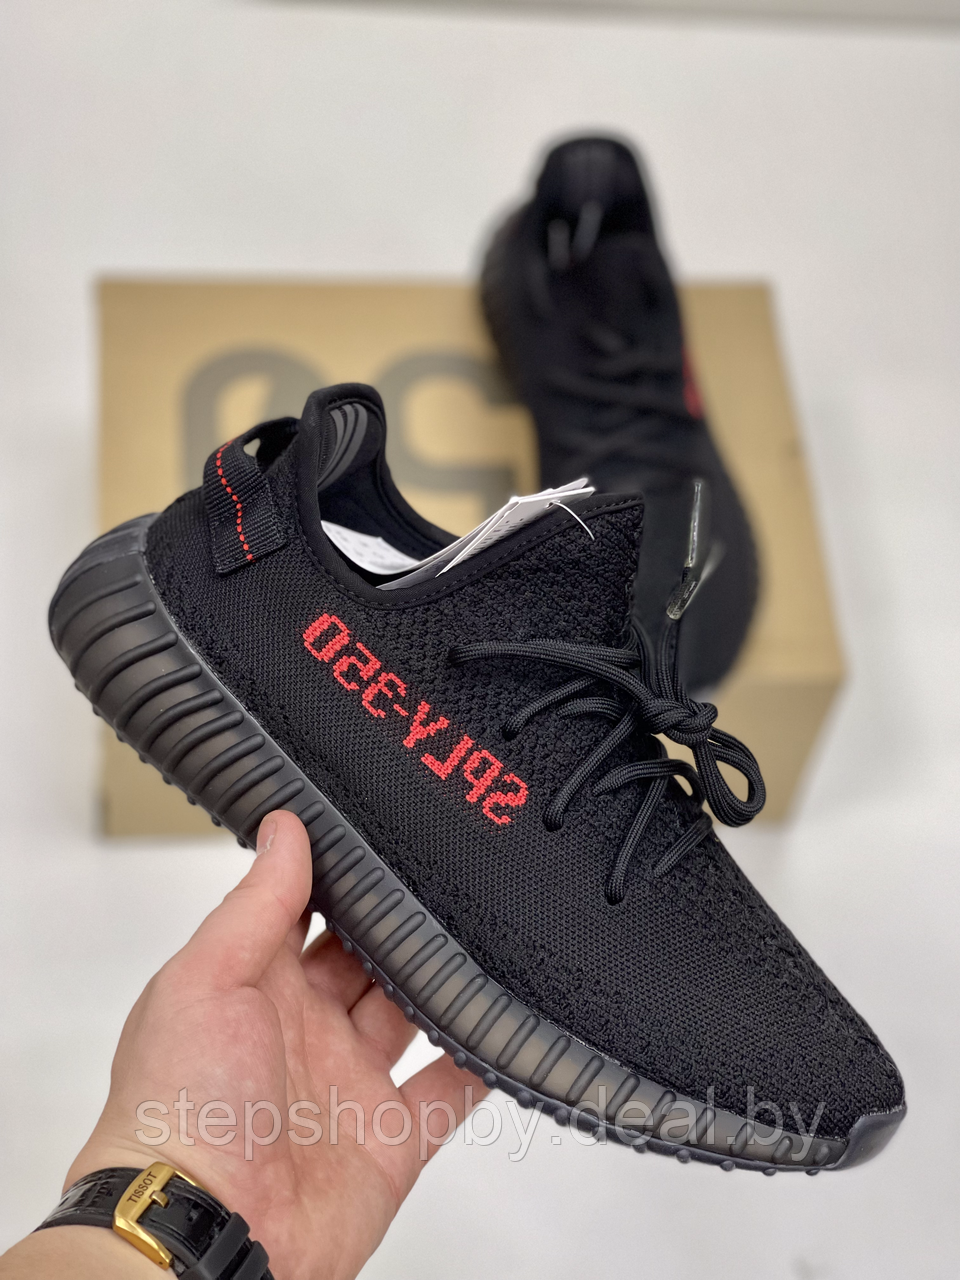 Adidas Yeezy Boost 350 V2 Core Black Red 'Bred' размер 43 - фото 1 - id-p177723567